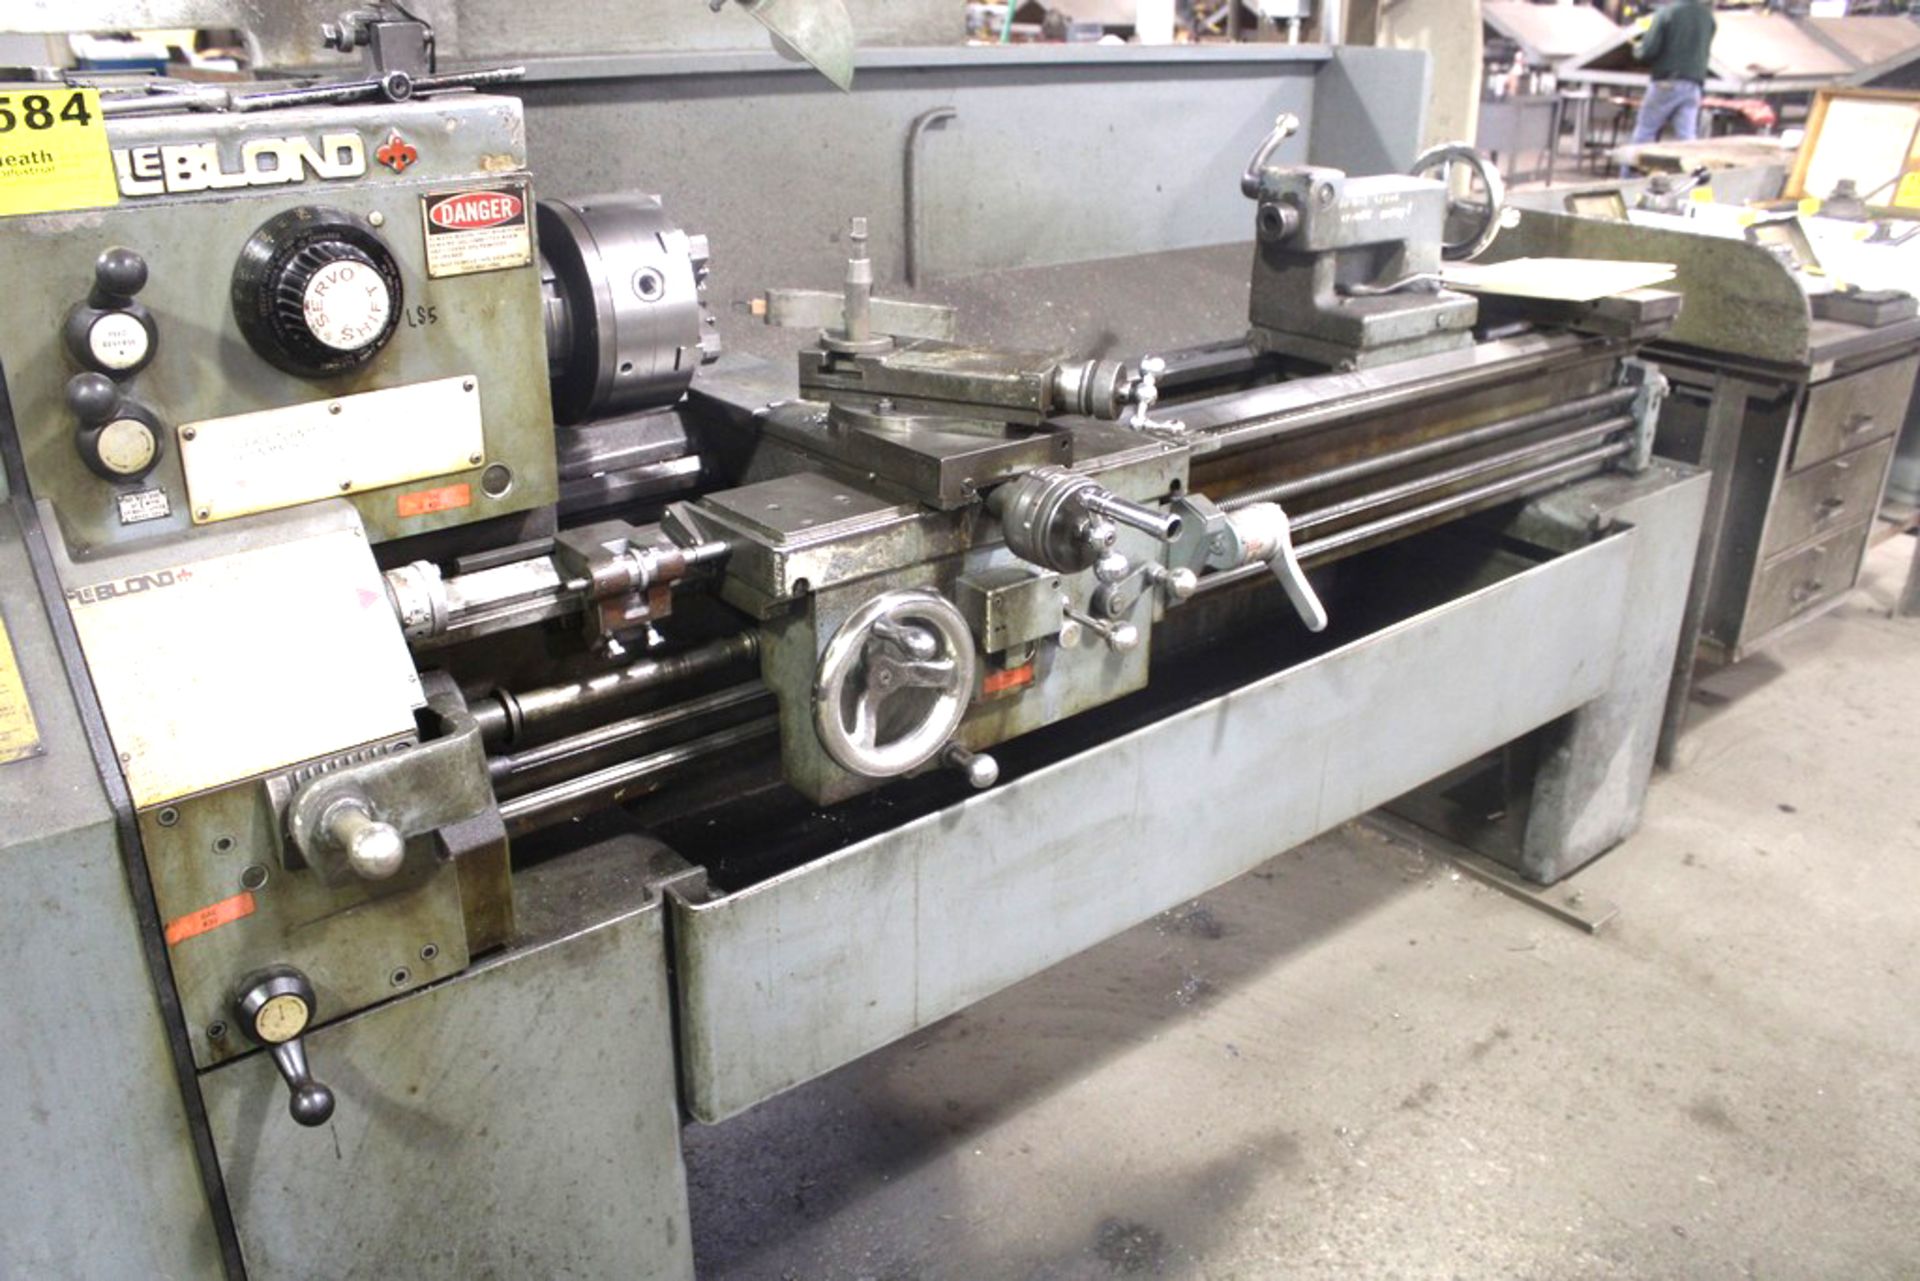 LEBLOND 15”X54” MODEL REGAL TOOLROOM LATHE, S/N 10C407, 1800 RPM SPINDLE, WITH 10” 6 - JAW CHUCK - Image 9 of 9